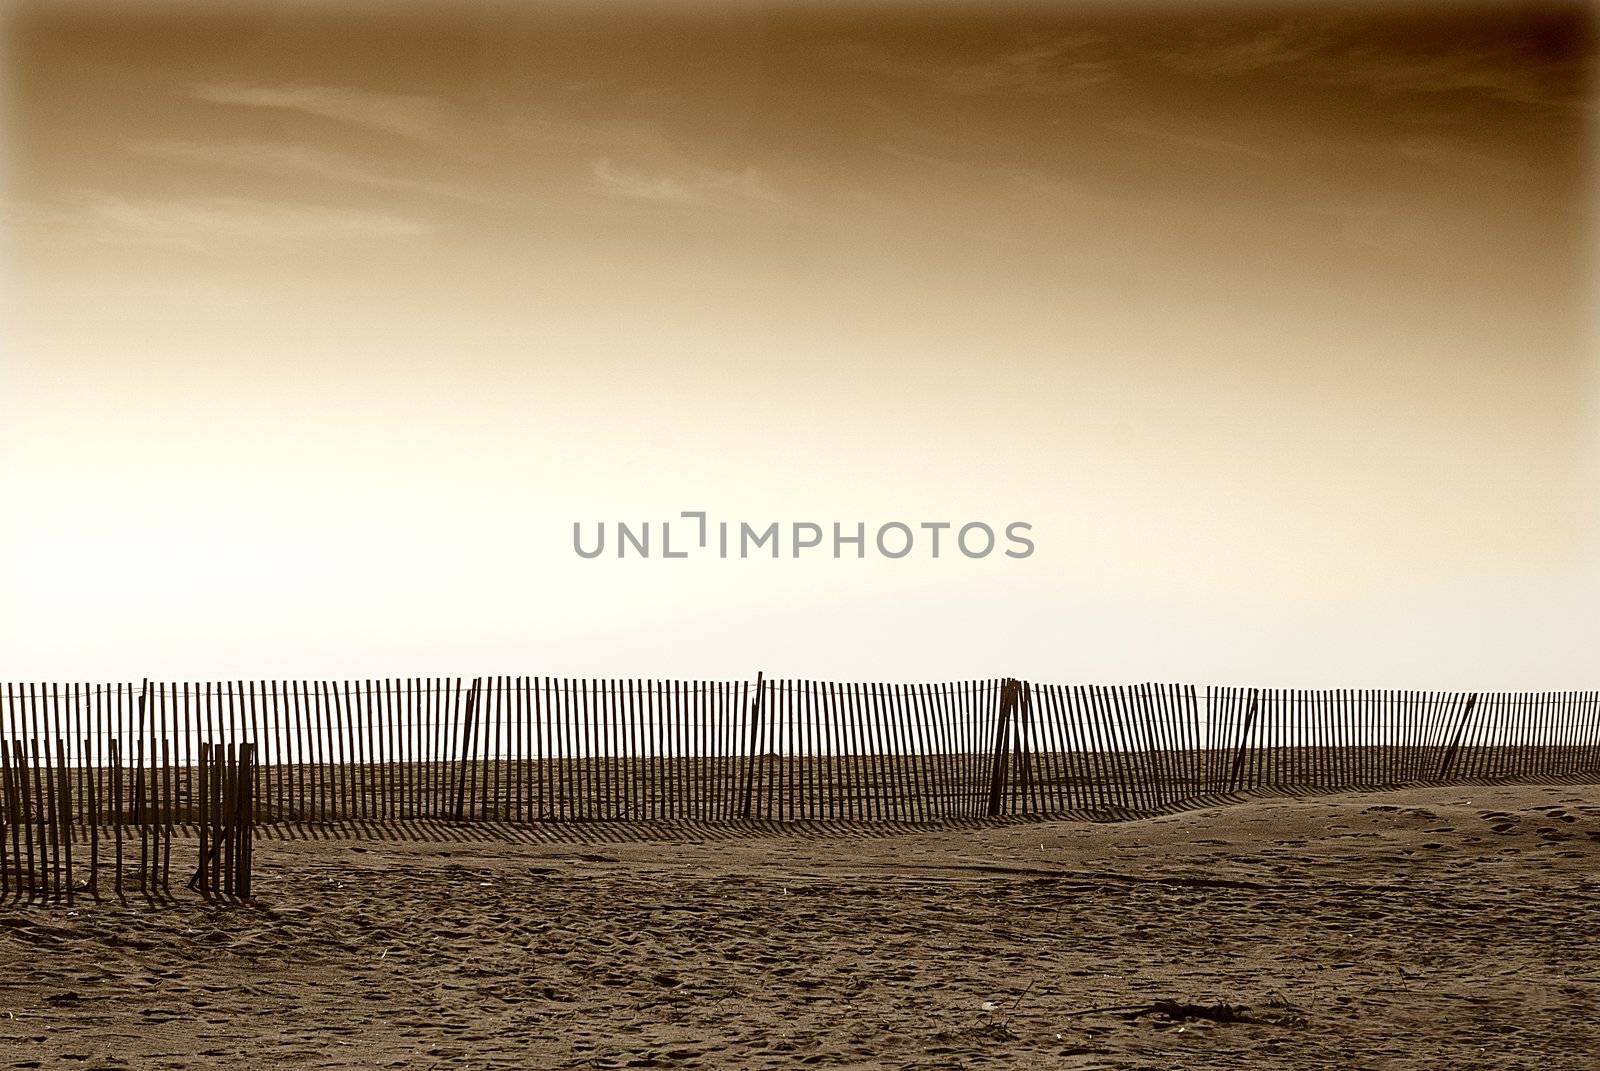 wooden fence along california sandy beach with sepia brown skies by itsrich